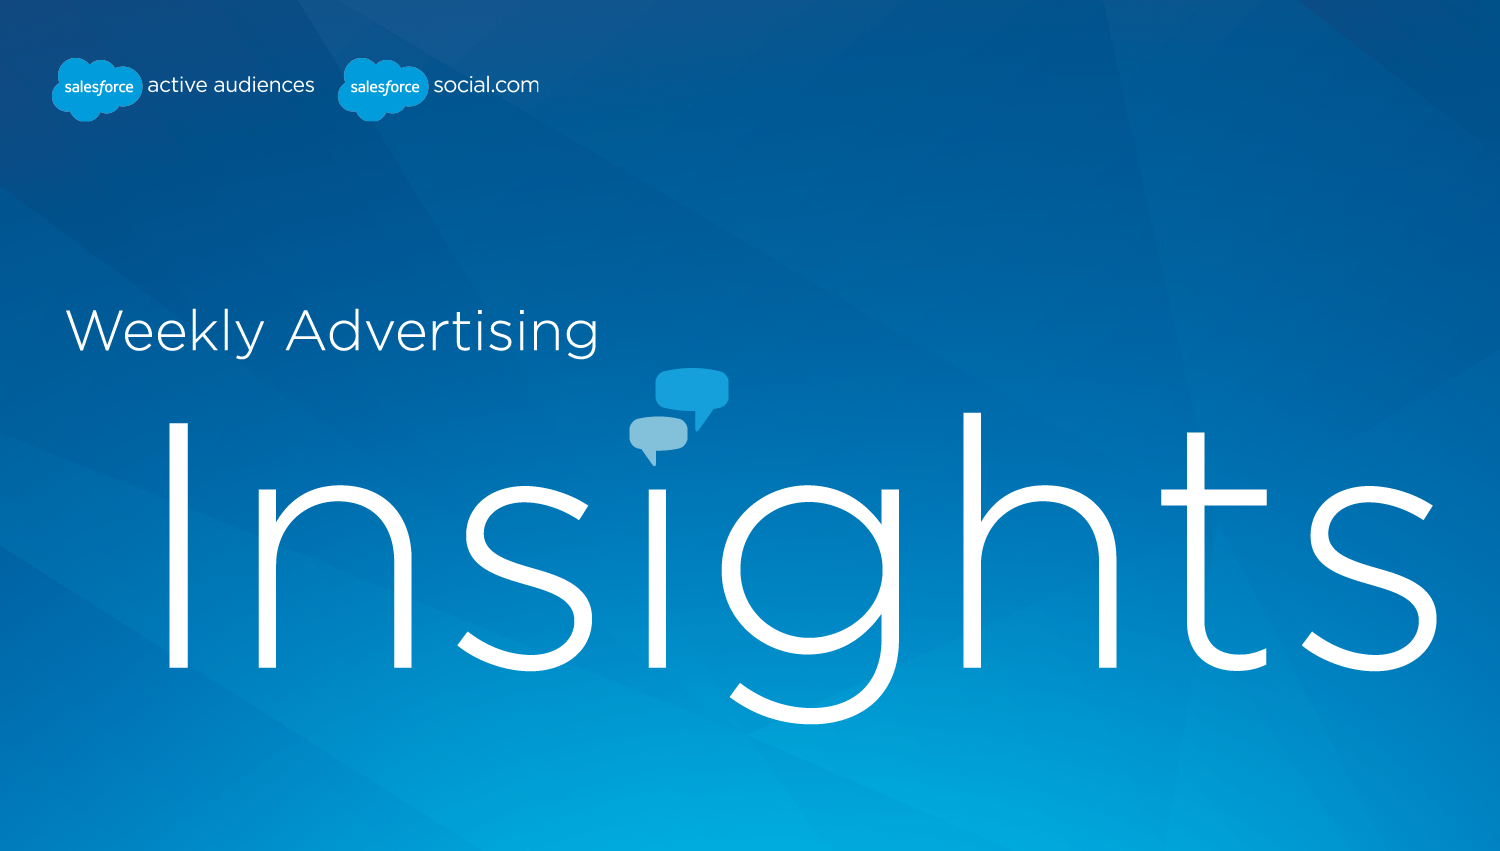 Advertising Insights: Mobile and Retail Together, eCommerce Across Devices, and Video Ads